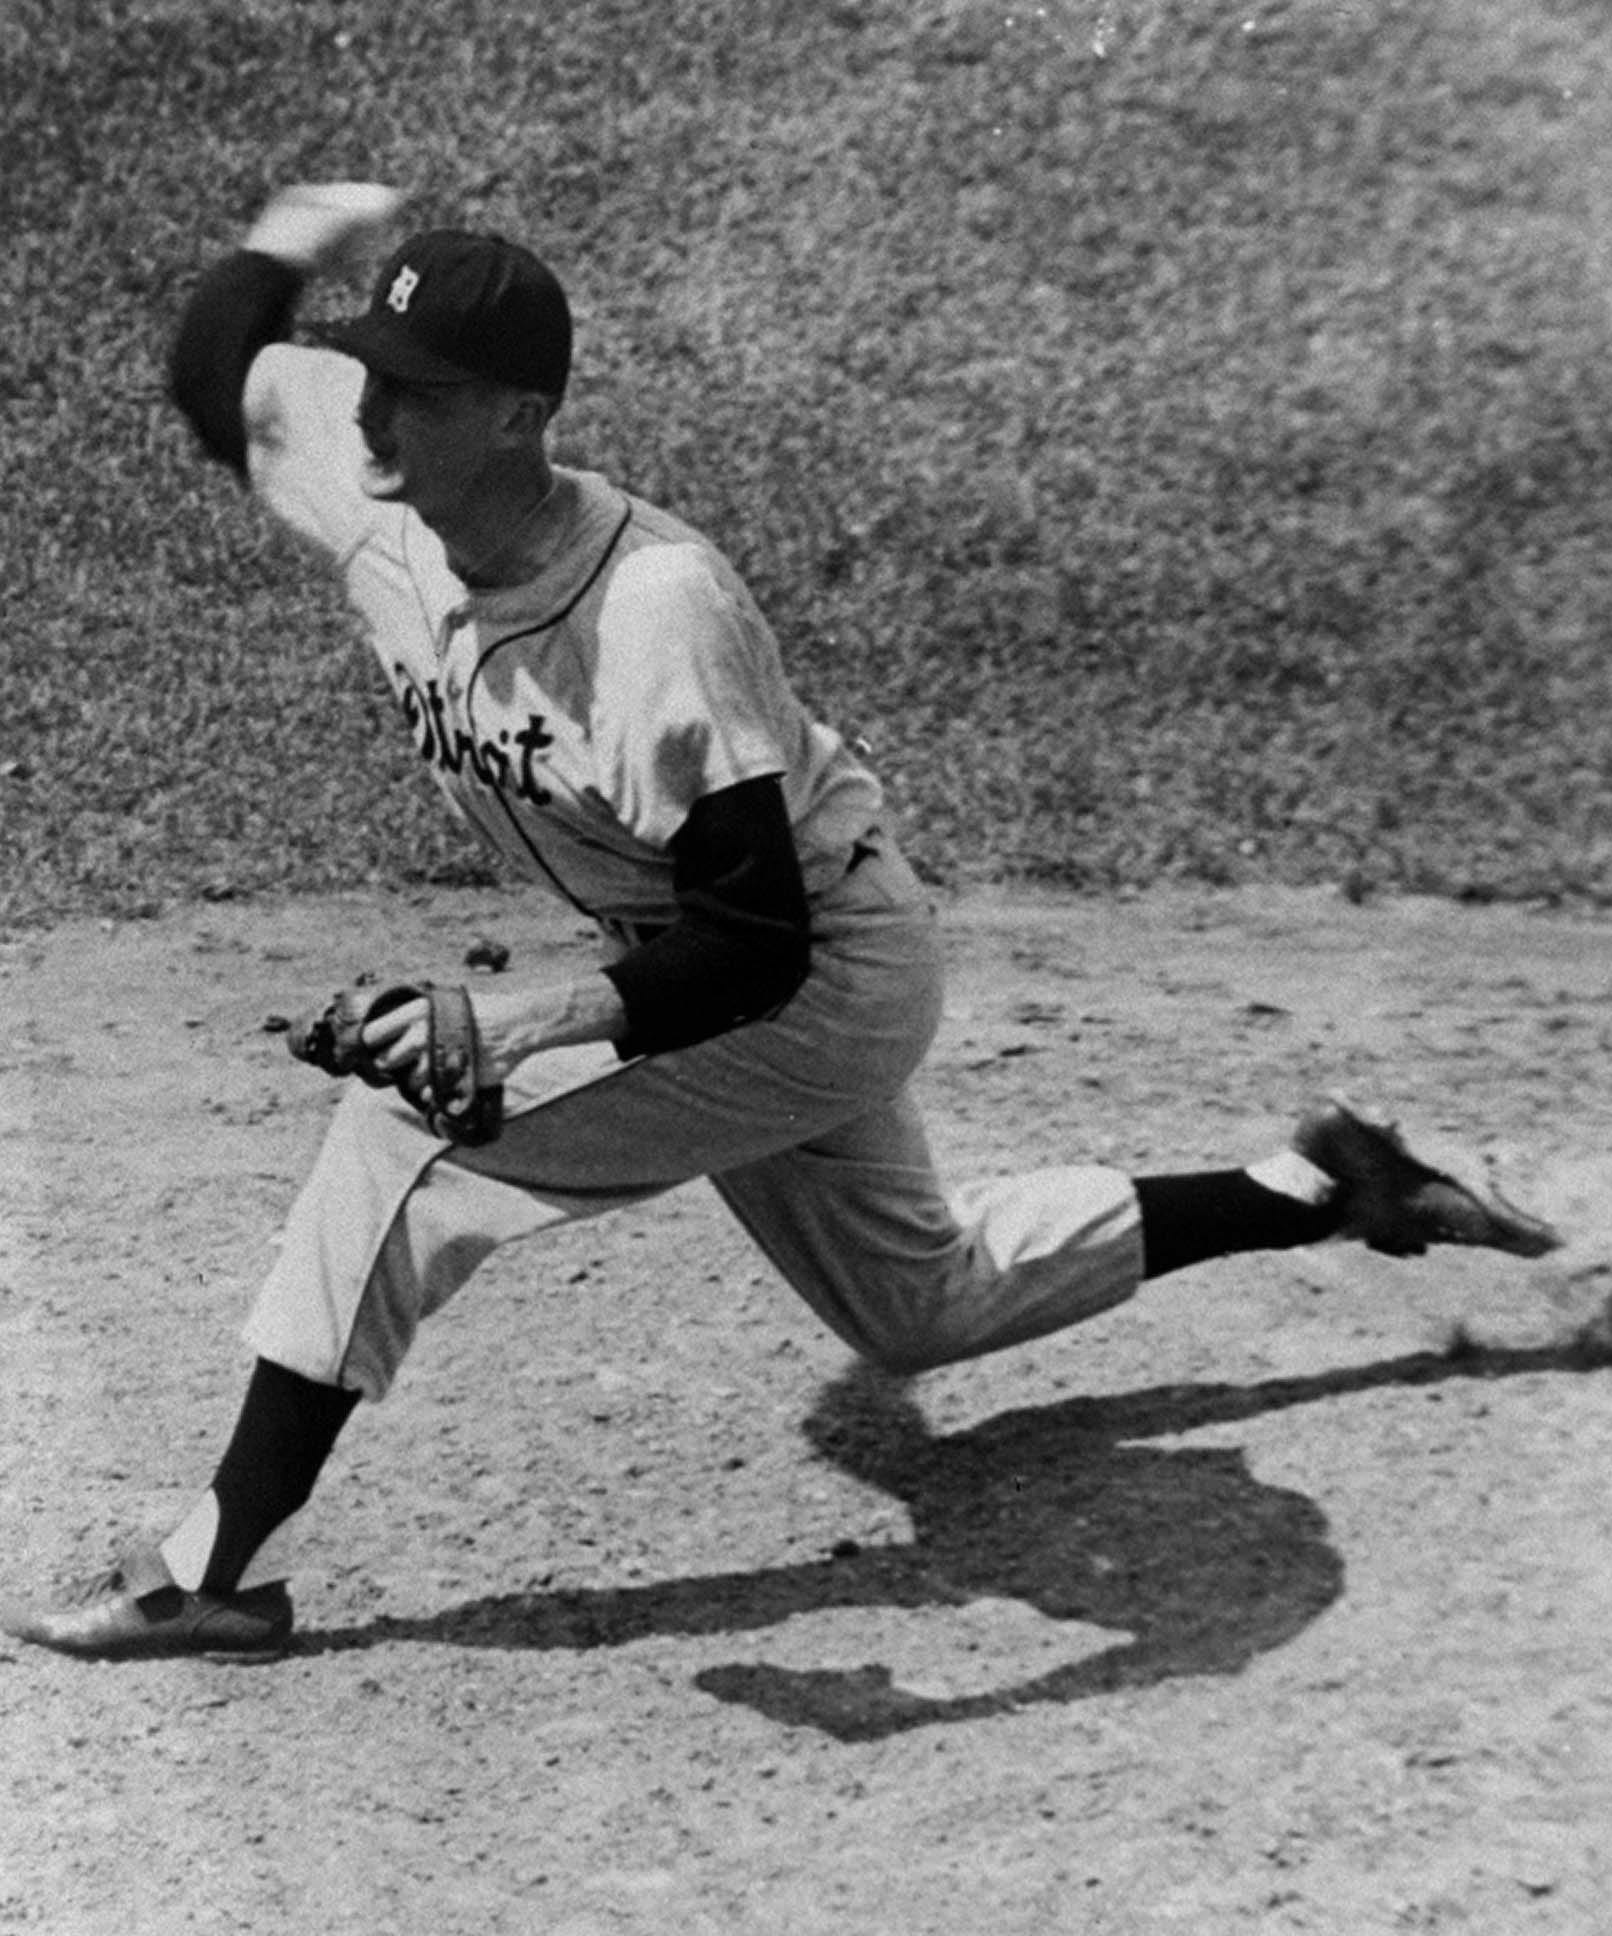 Jim Bunning, July 20, 1958: Bunning fanned 12 in defeating the Boston Red Sox, 3-0. He allowed just a pair of walks -- both to leadoff hitter Gene Stephens -- in tossing the first of his two career no-hitters.